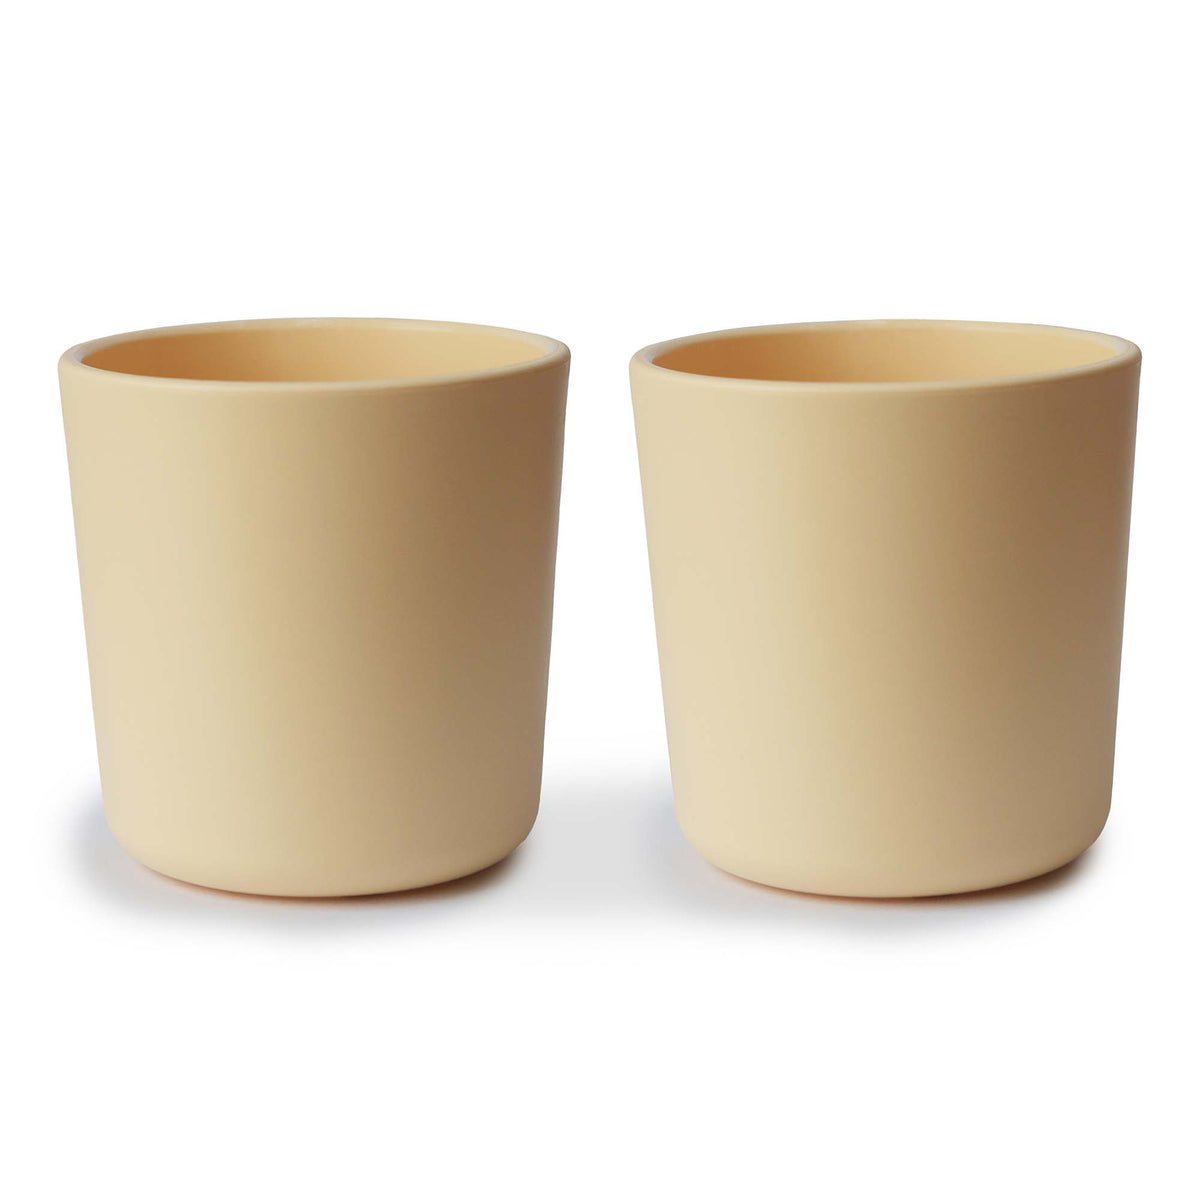 Cups - Set of 2